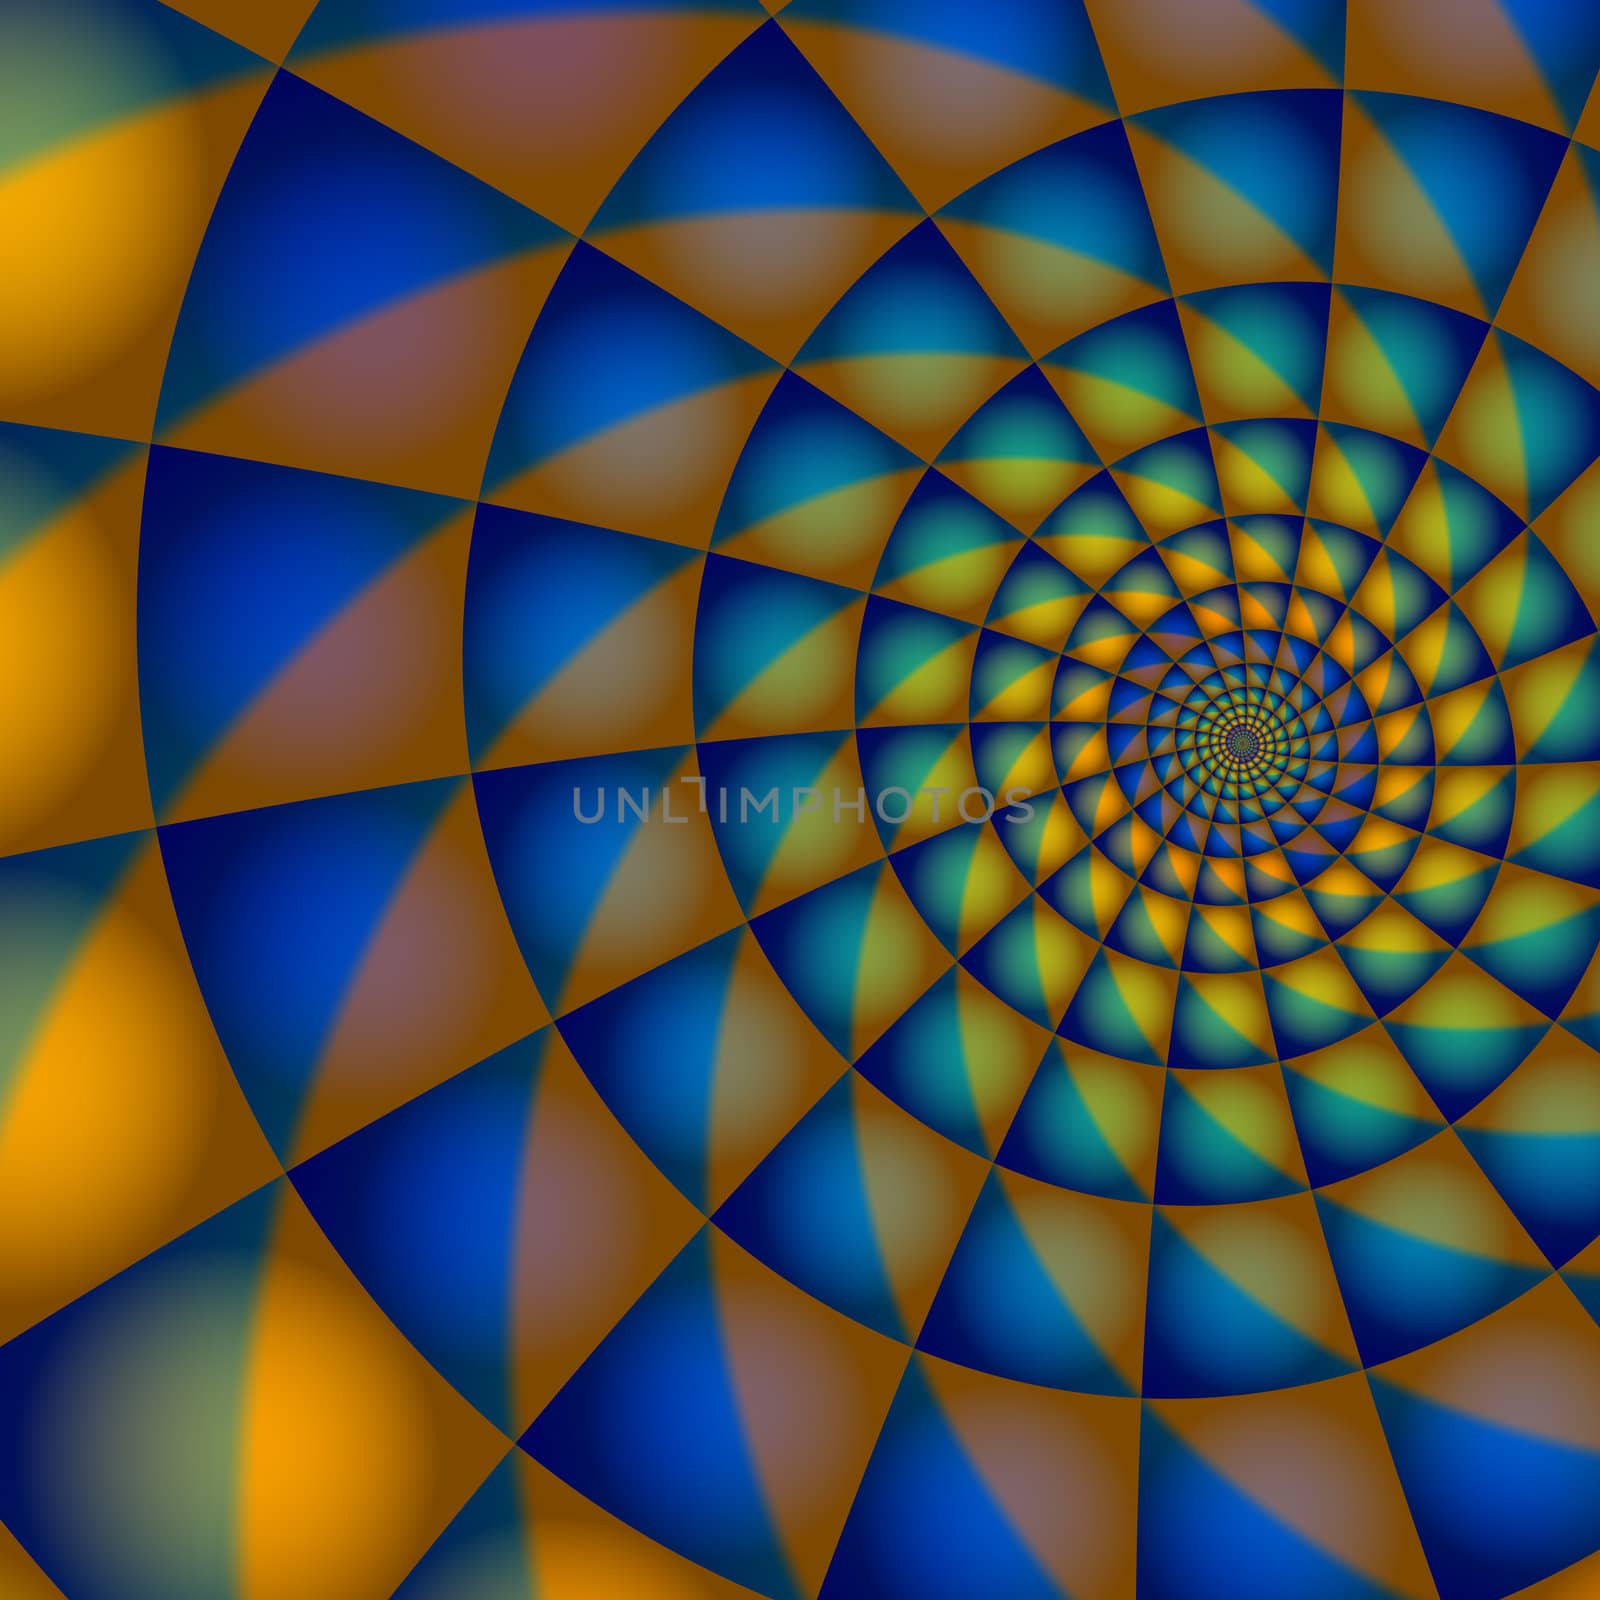 An abstract illustration in a spiral pattern done in shades of blue and orange.